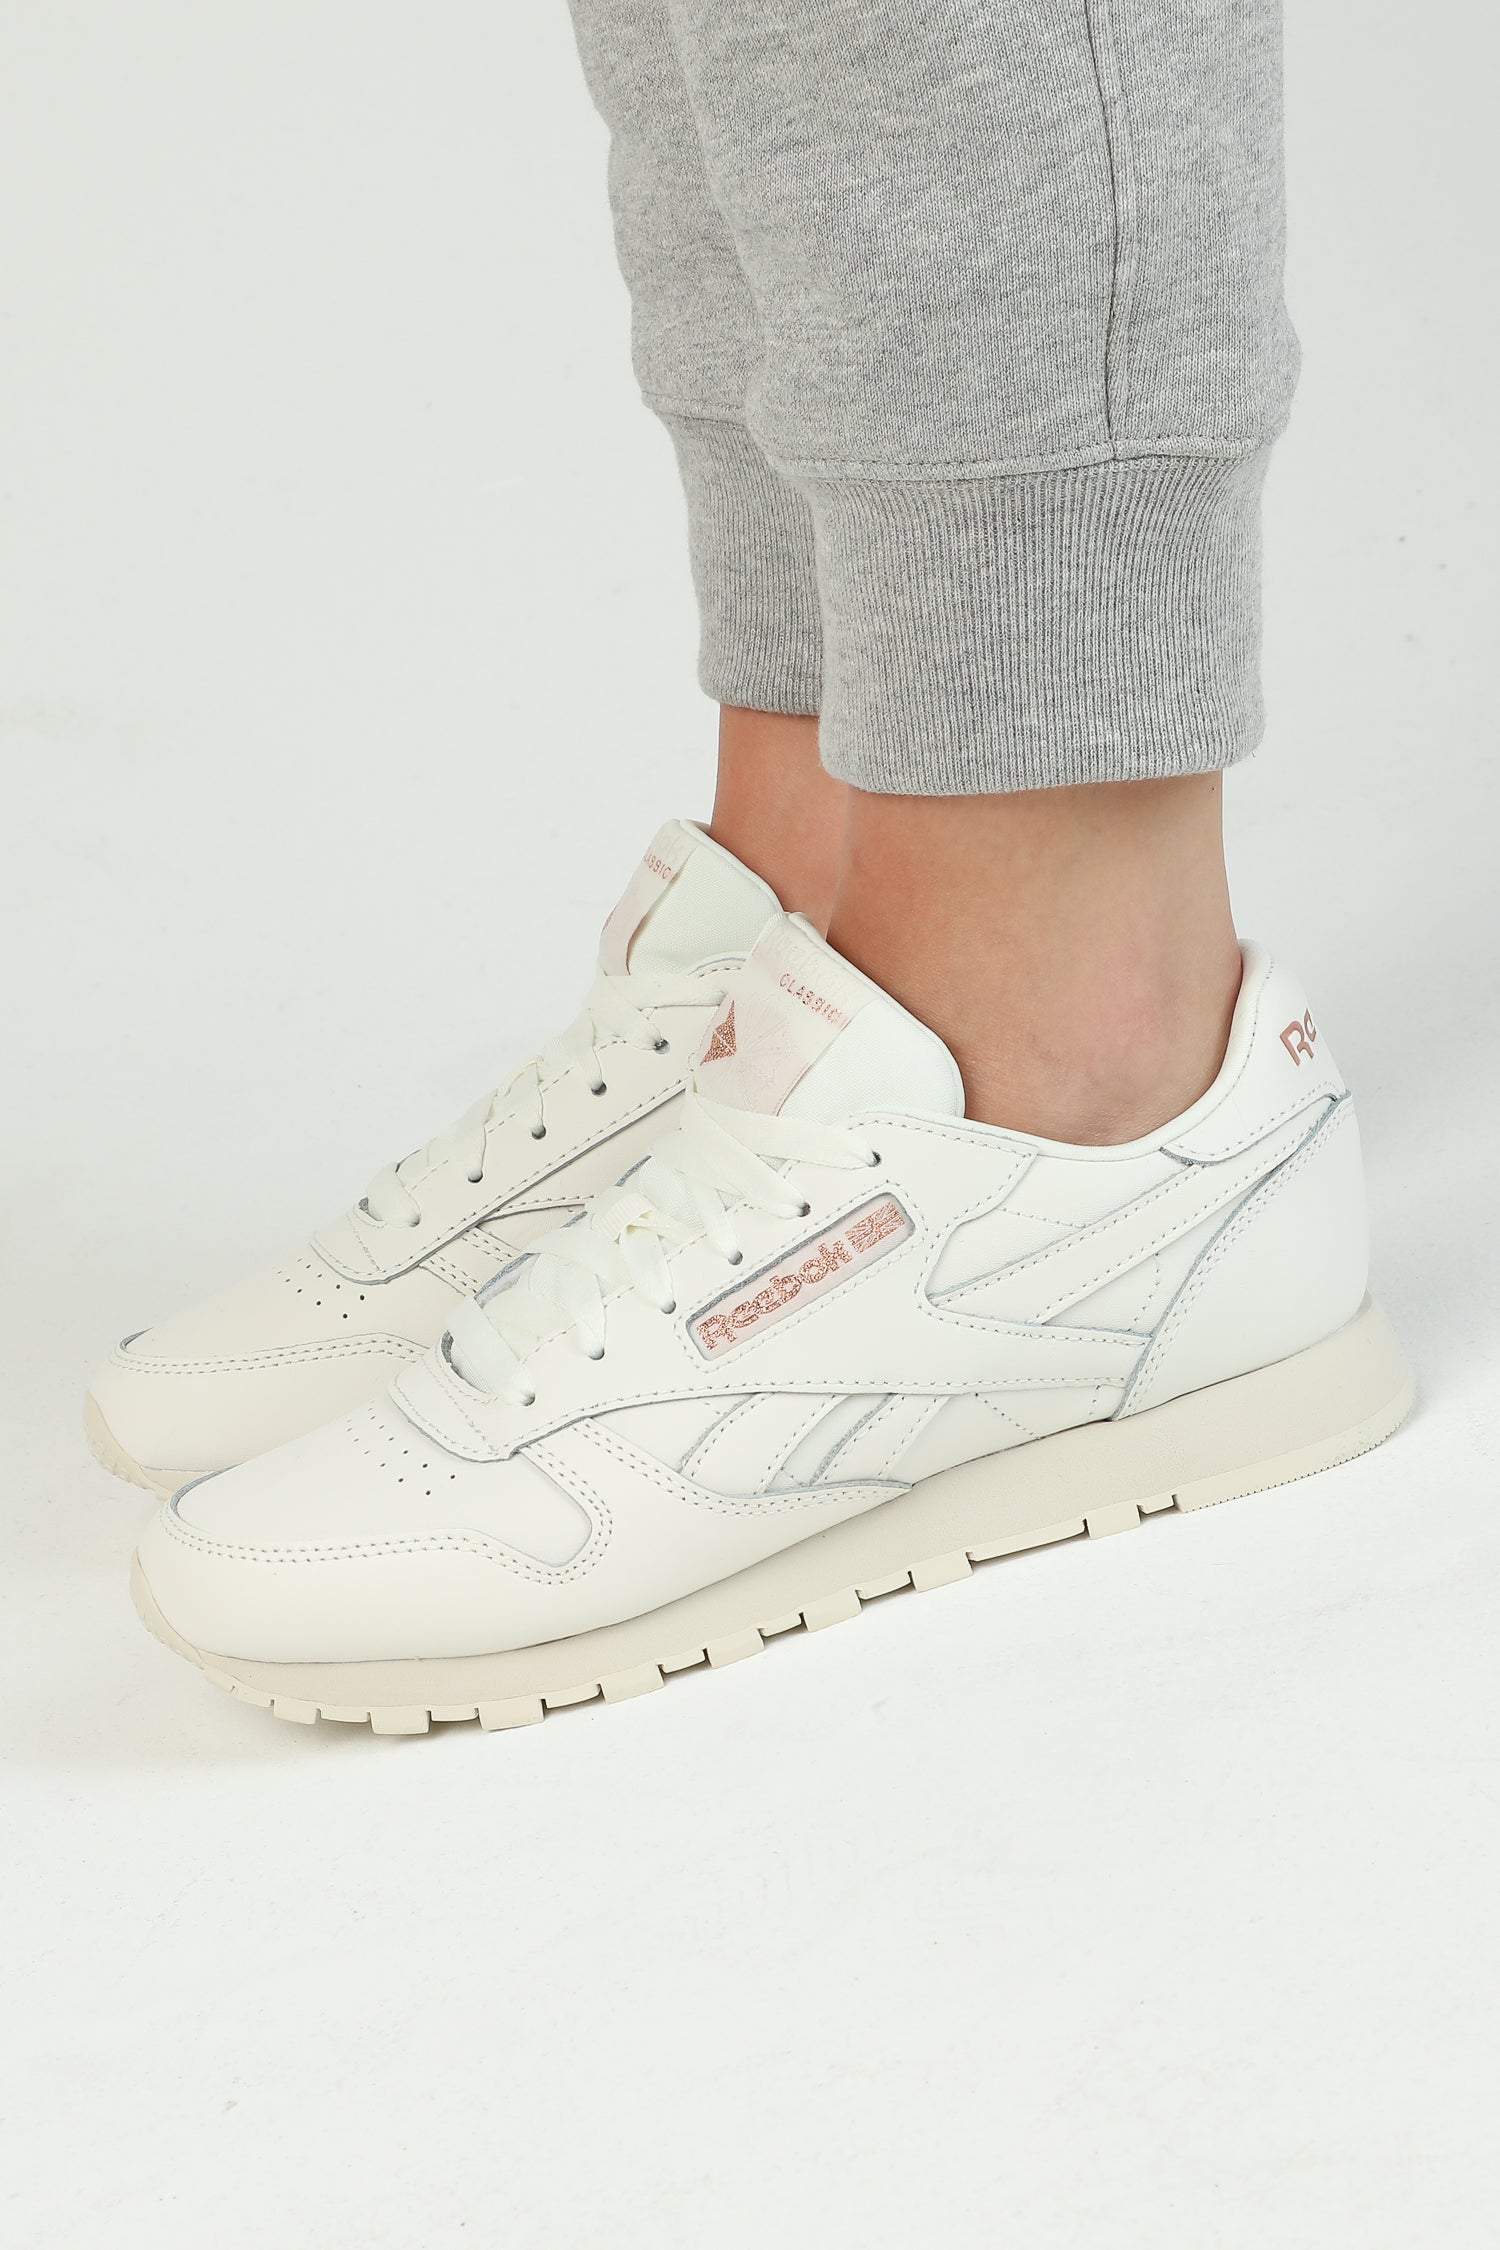 reebok classic leather rose gold